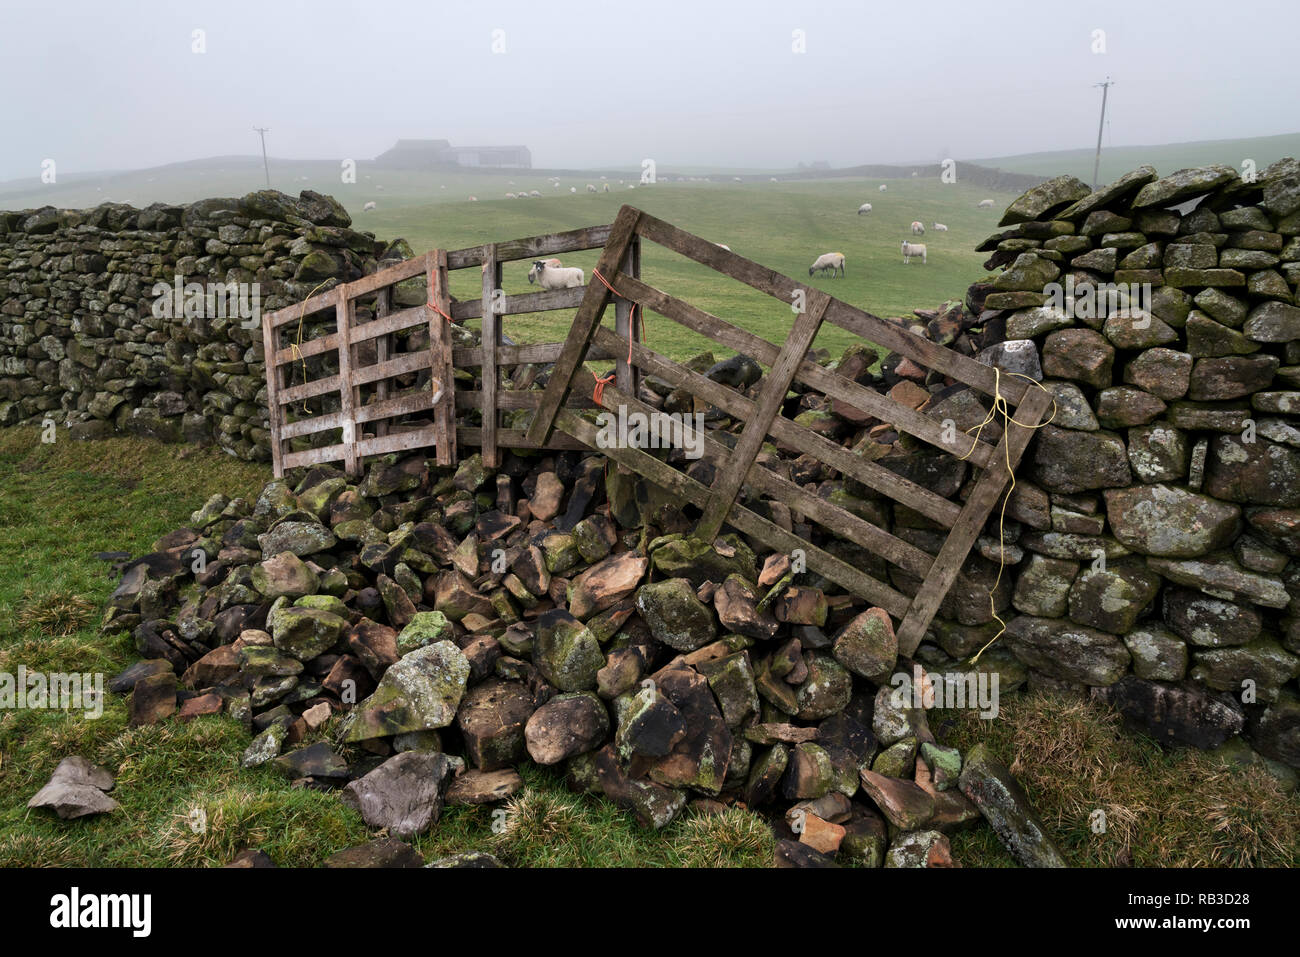 Collapsed dry stone wall near Settle, Yorkshire Dales National Park, UK. Sheep graze in surrounding fields. Temporary fencing blocks the gap. Stock Photo